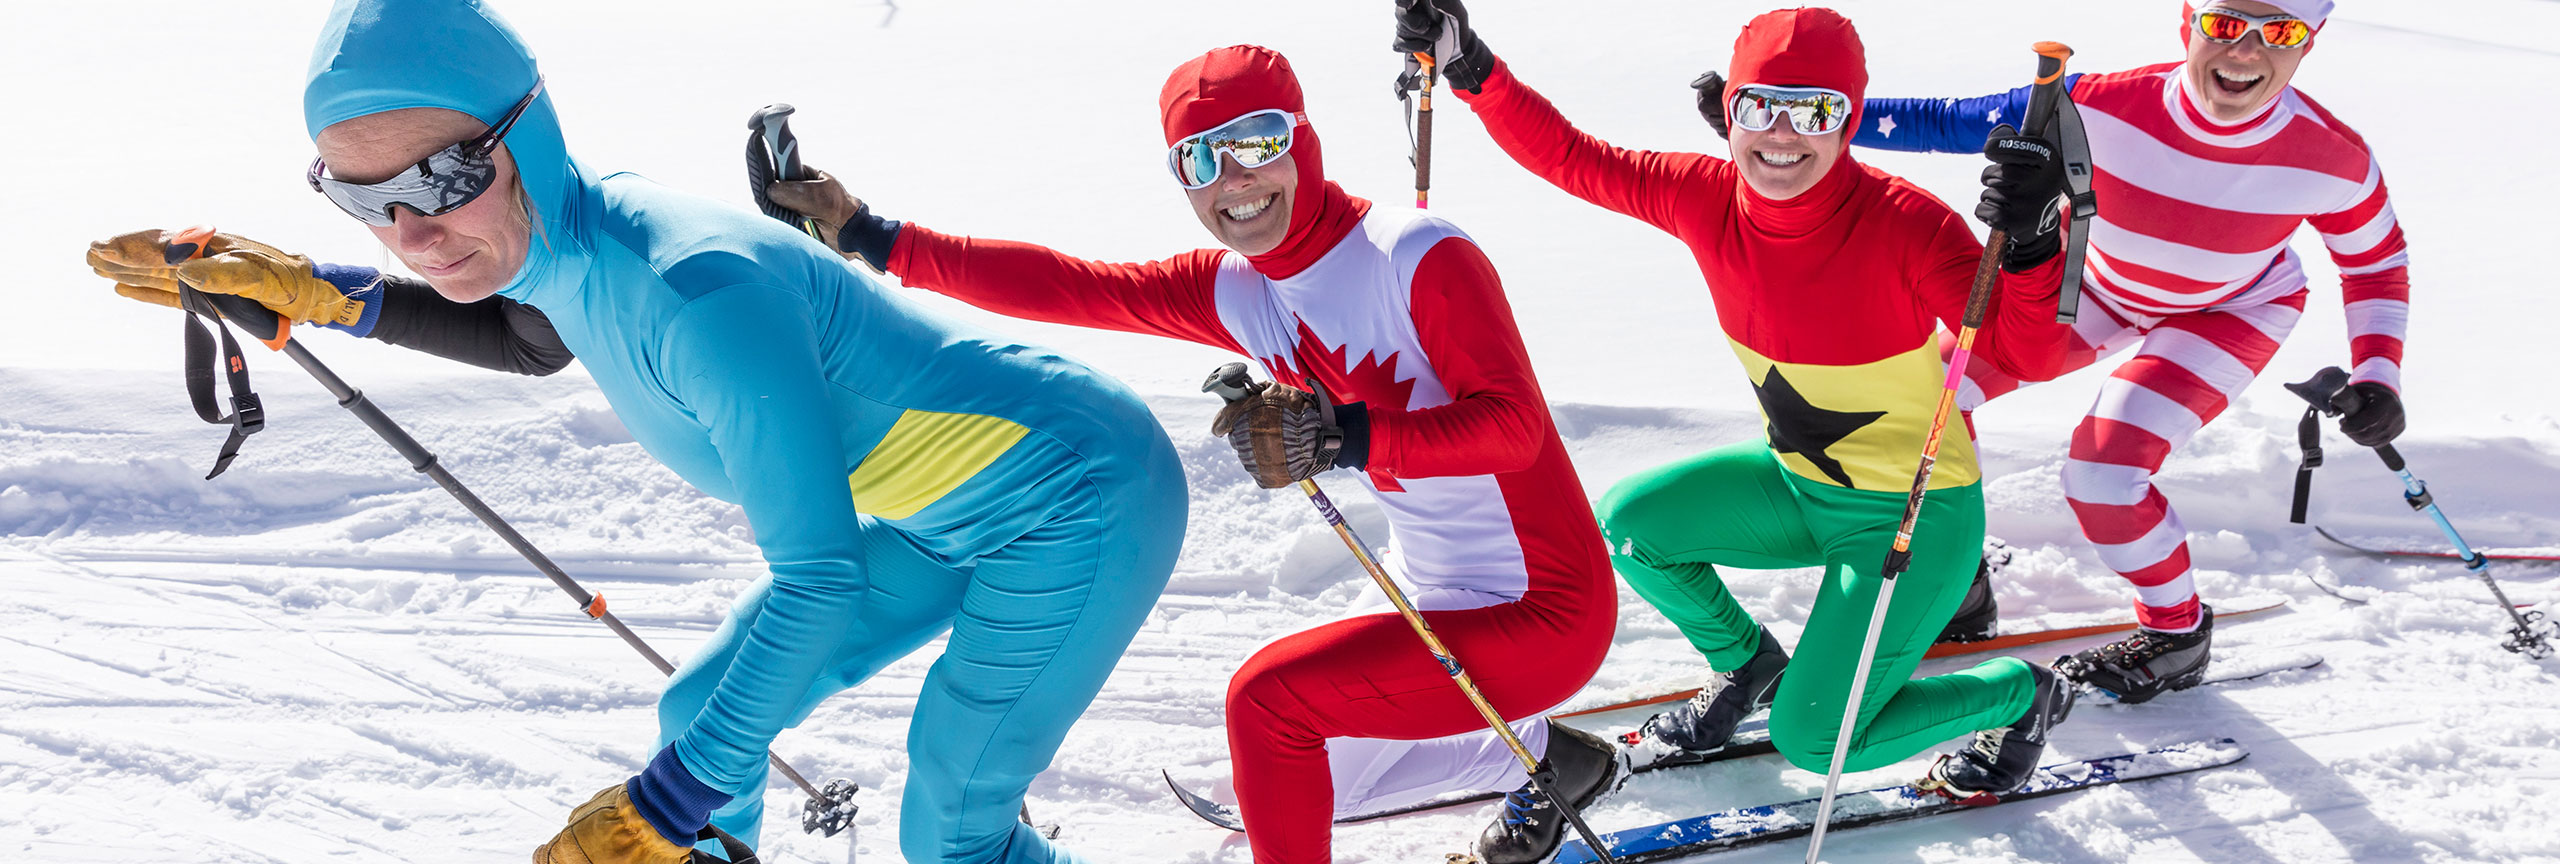 Four people dressed in colorful costumes on cross country skis.